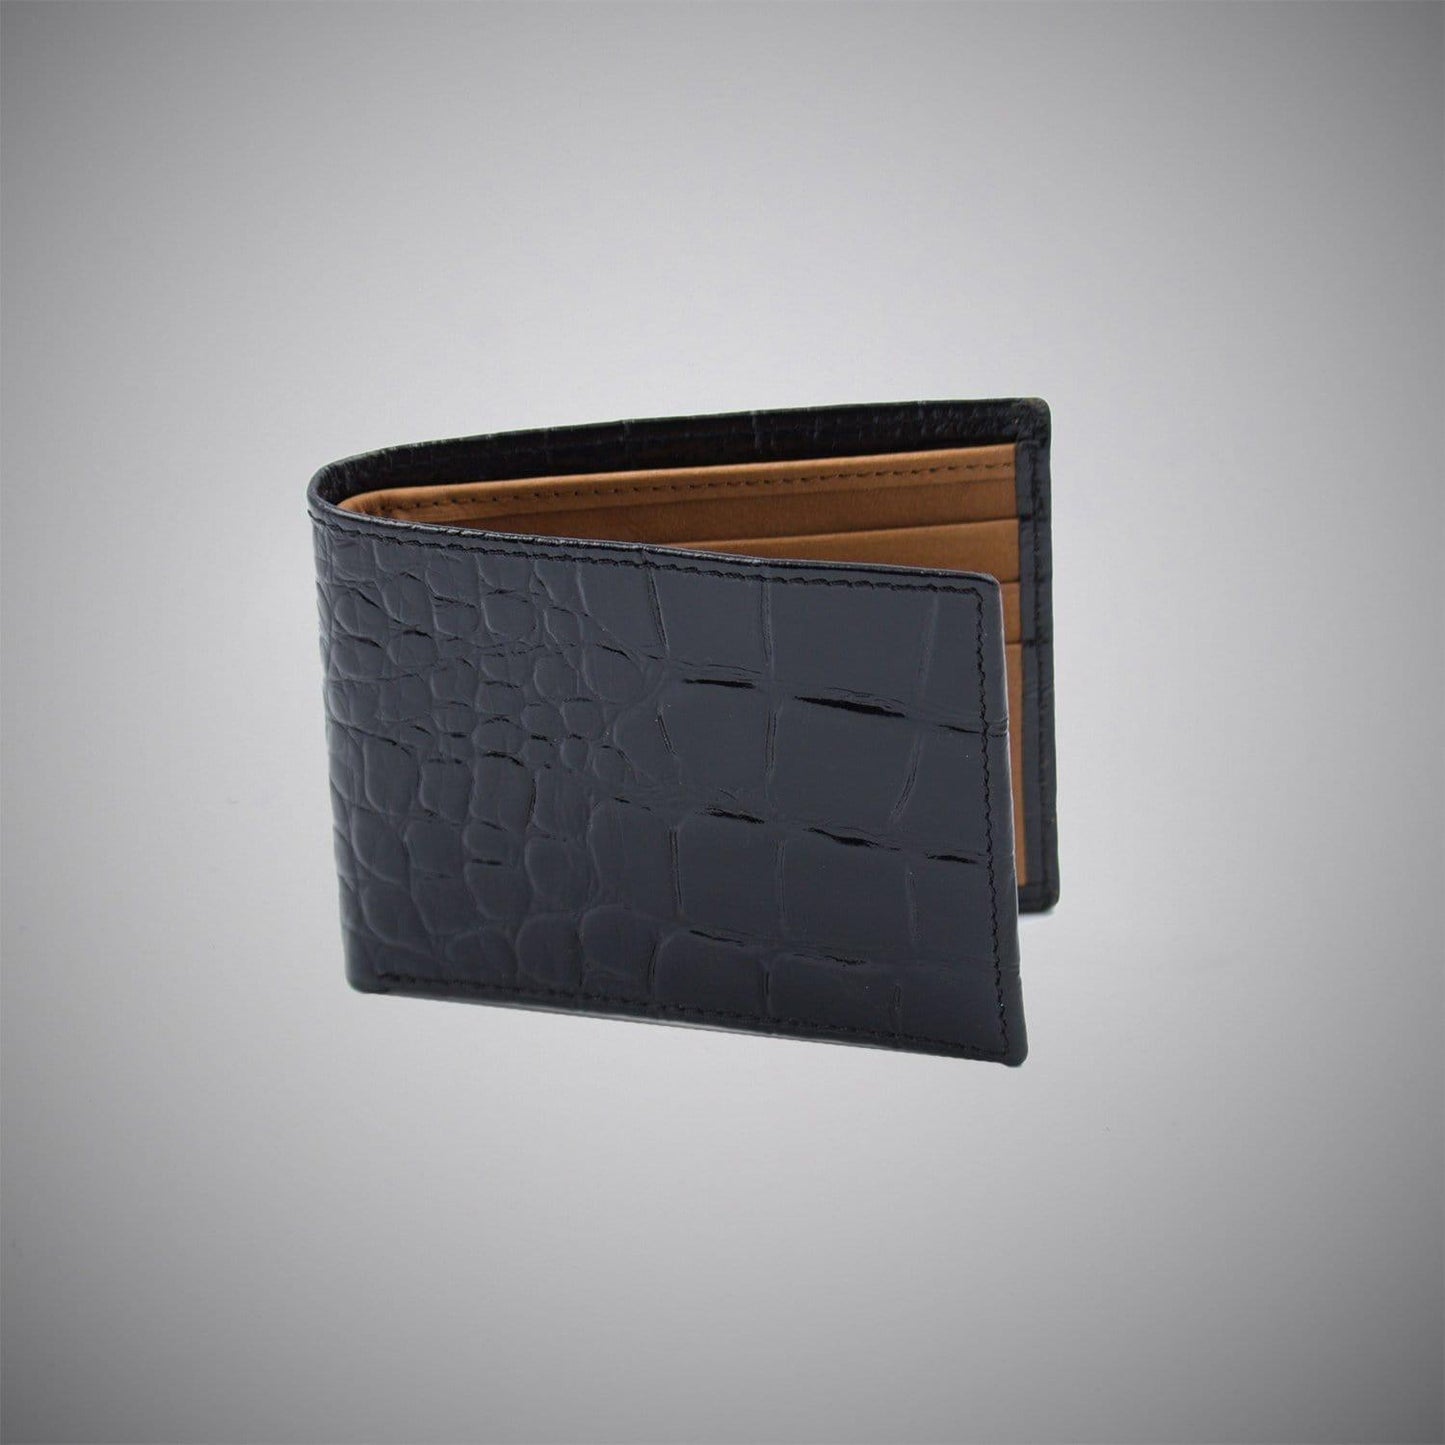 High Gloss Black Crocodile Embossed Calf Leather Wallet With Tan Suede Interior - Just White Shirts